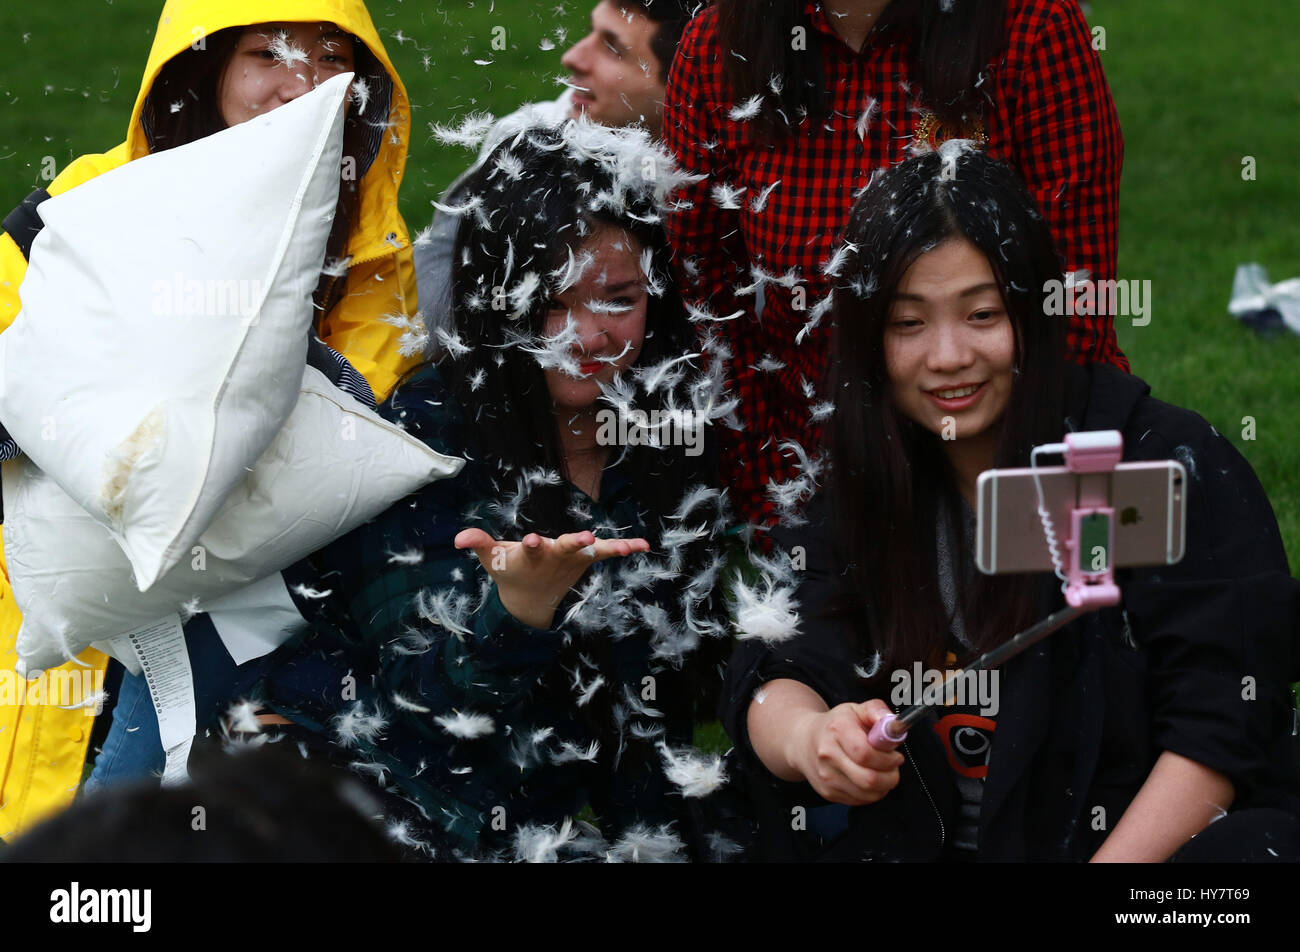 London, UK. 01st Apr, 2017. People taking a selfie after pillow-fighting on World Pillow Fight Day, in Kennington Park, London, UK, on April 1, 2017. Credit: Paul Marriott/Alamy Live News Stock Photo